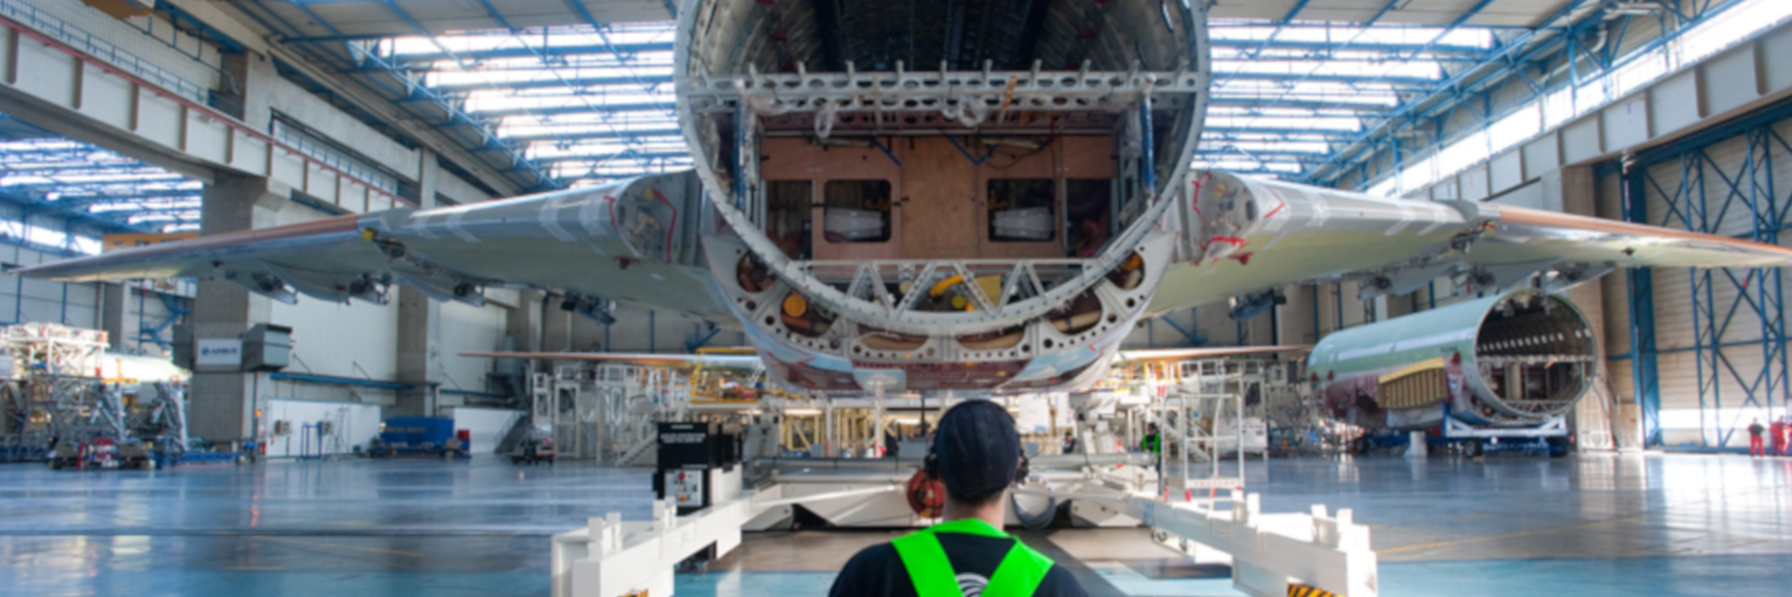 AIRBUS frame assembly manufacturing